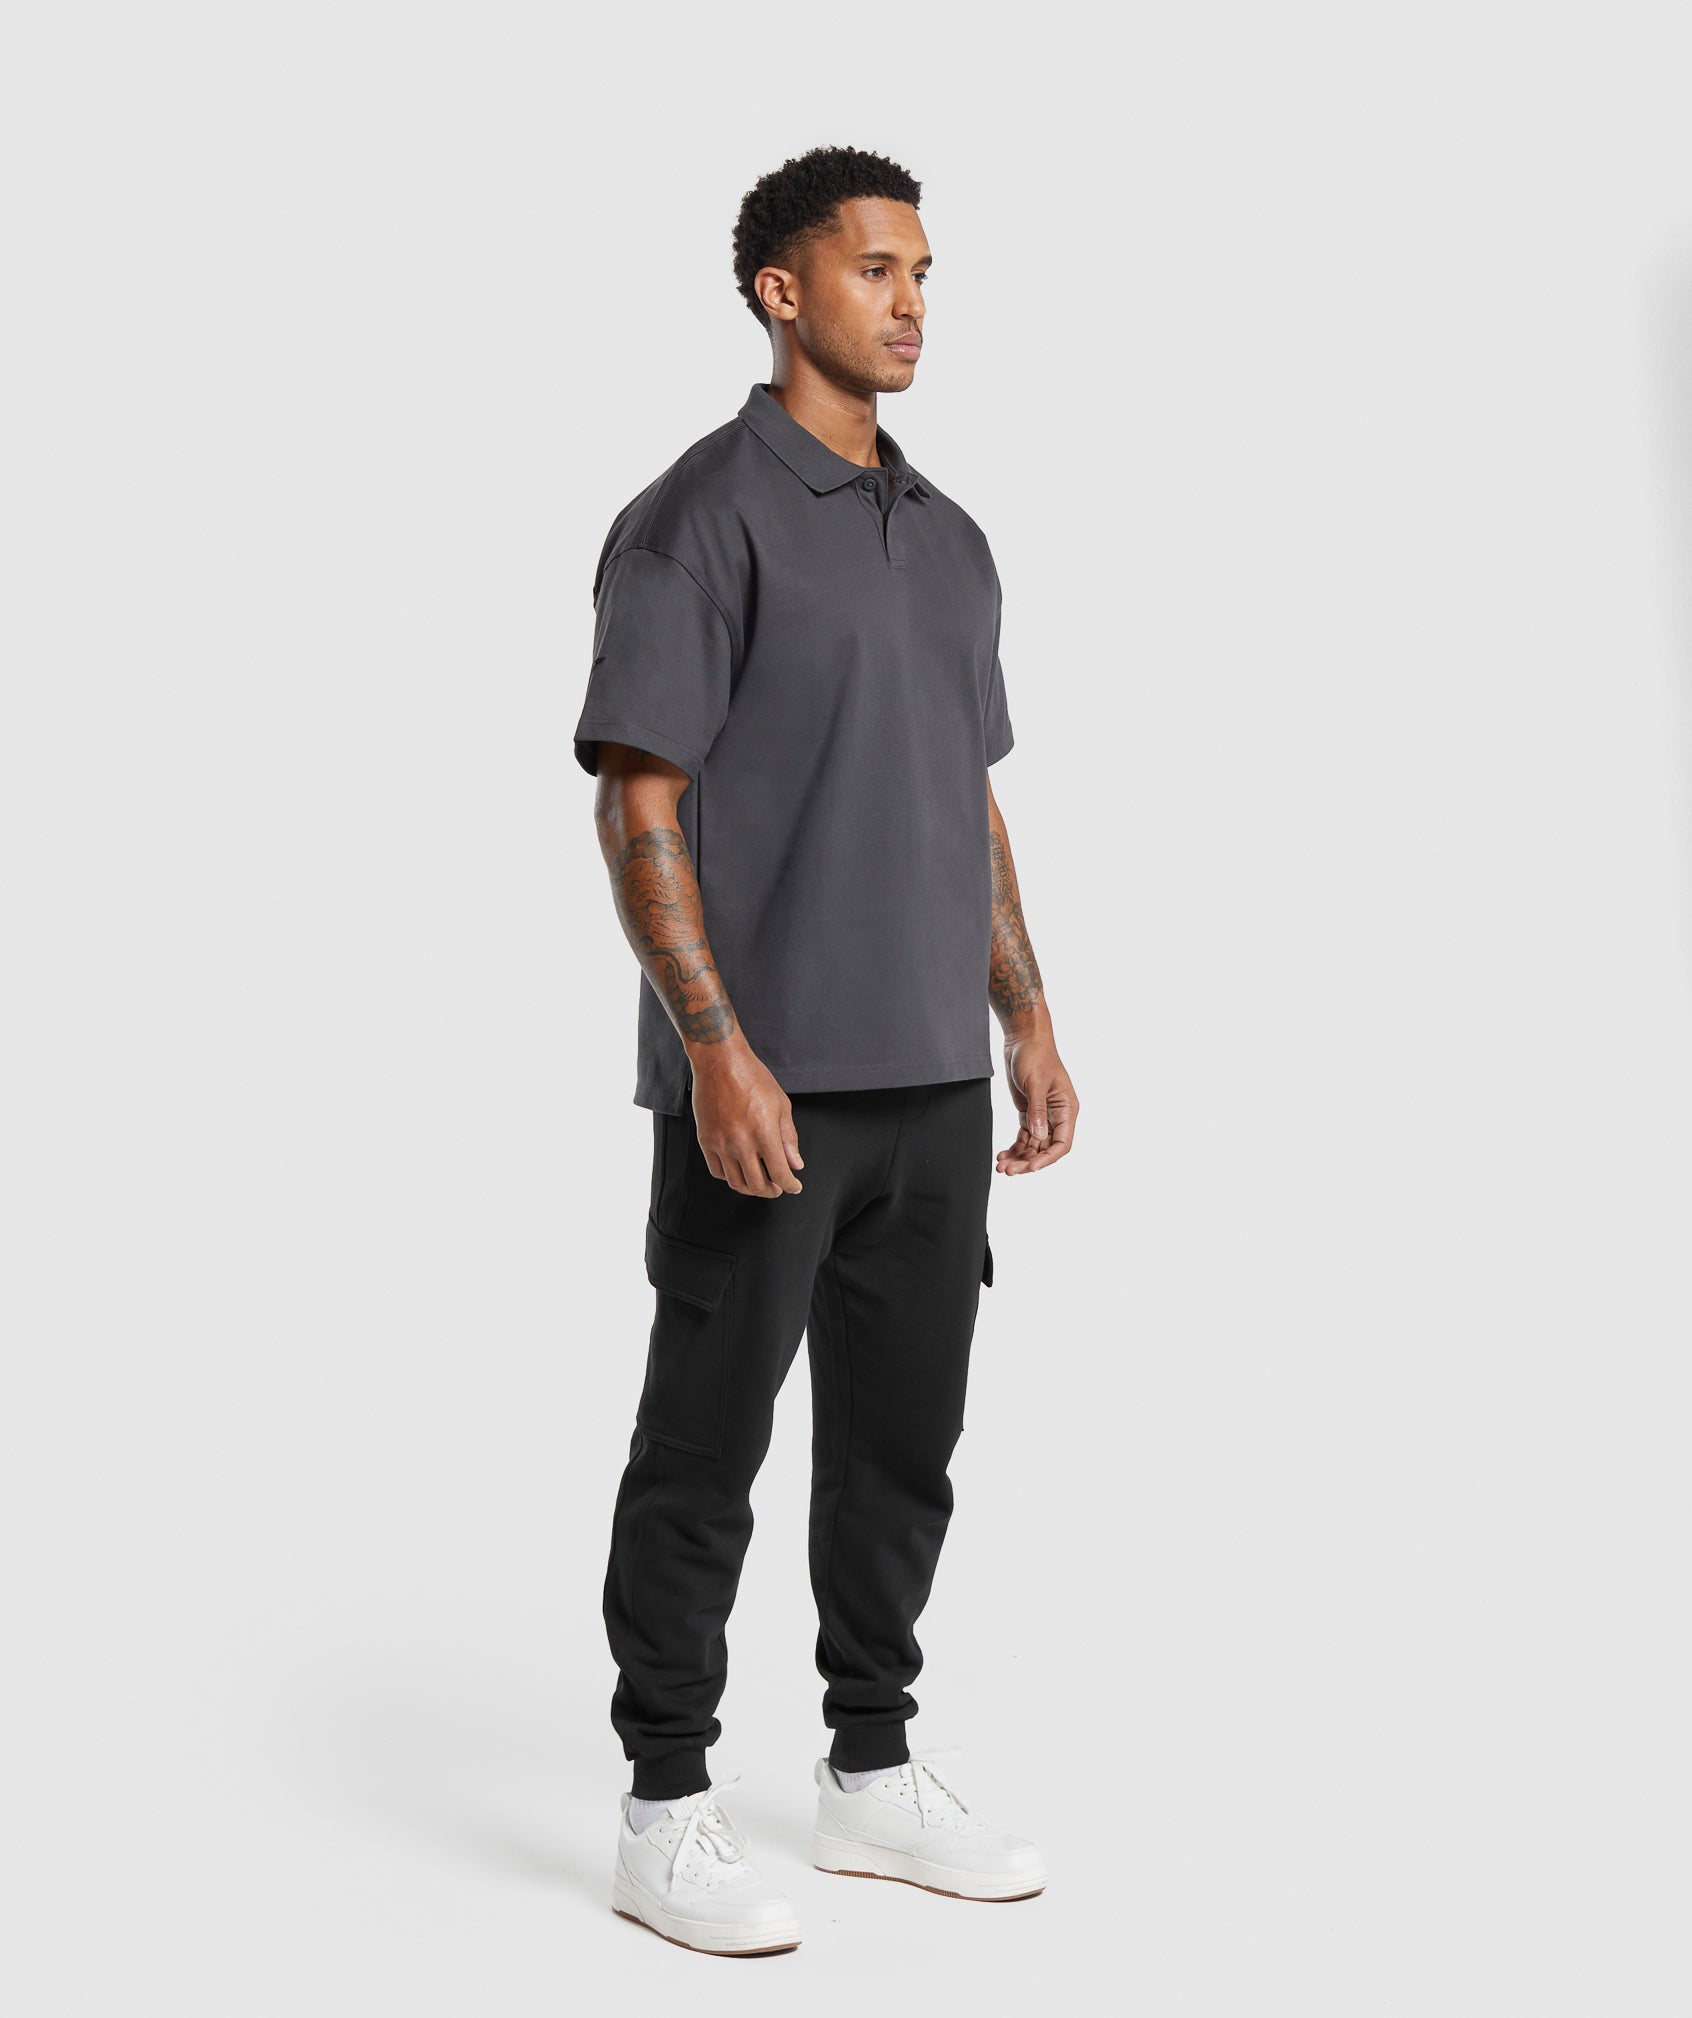 Short Sleeve Polo in Onyx Grey - view 4